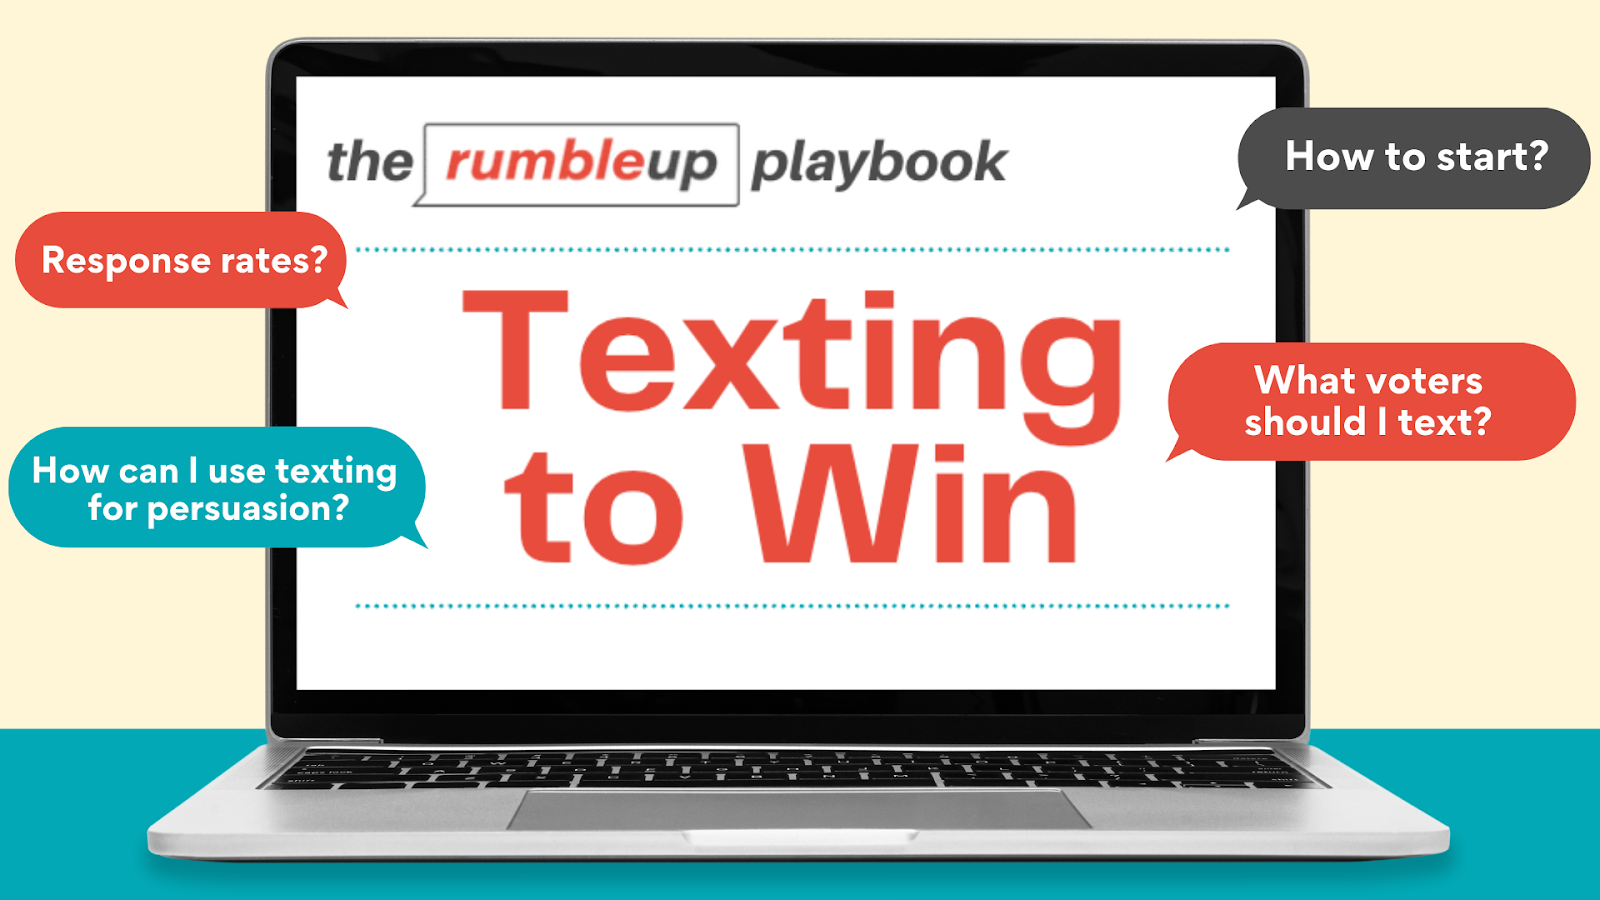 Why You Need the Texting to Win Playbook in 2022